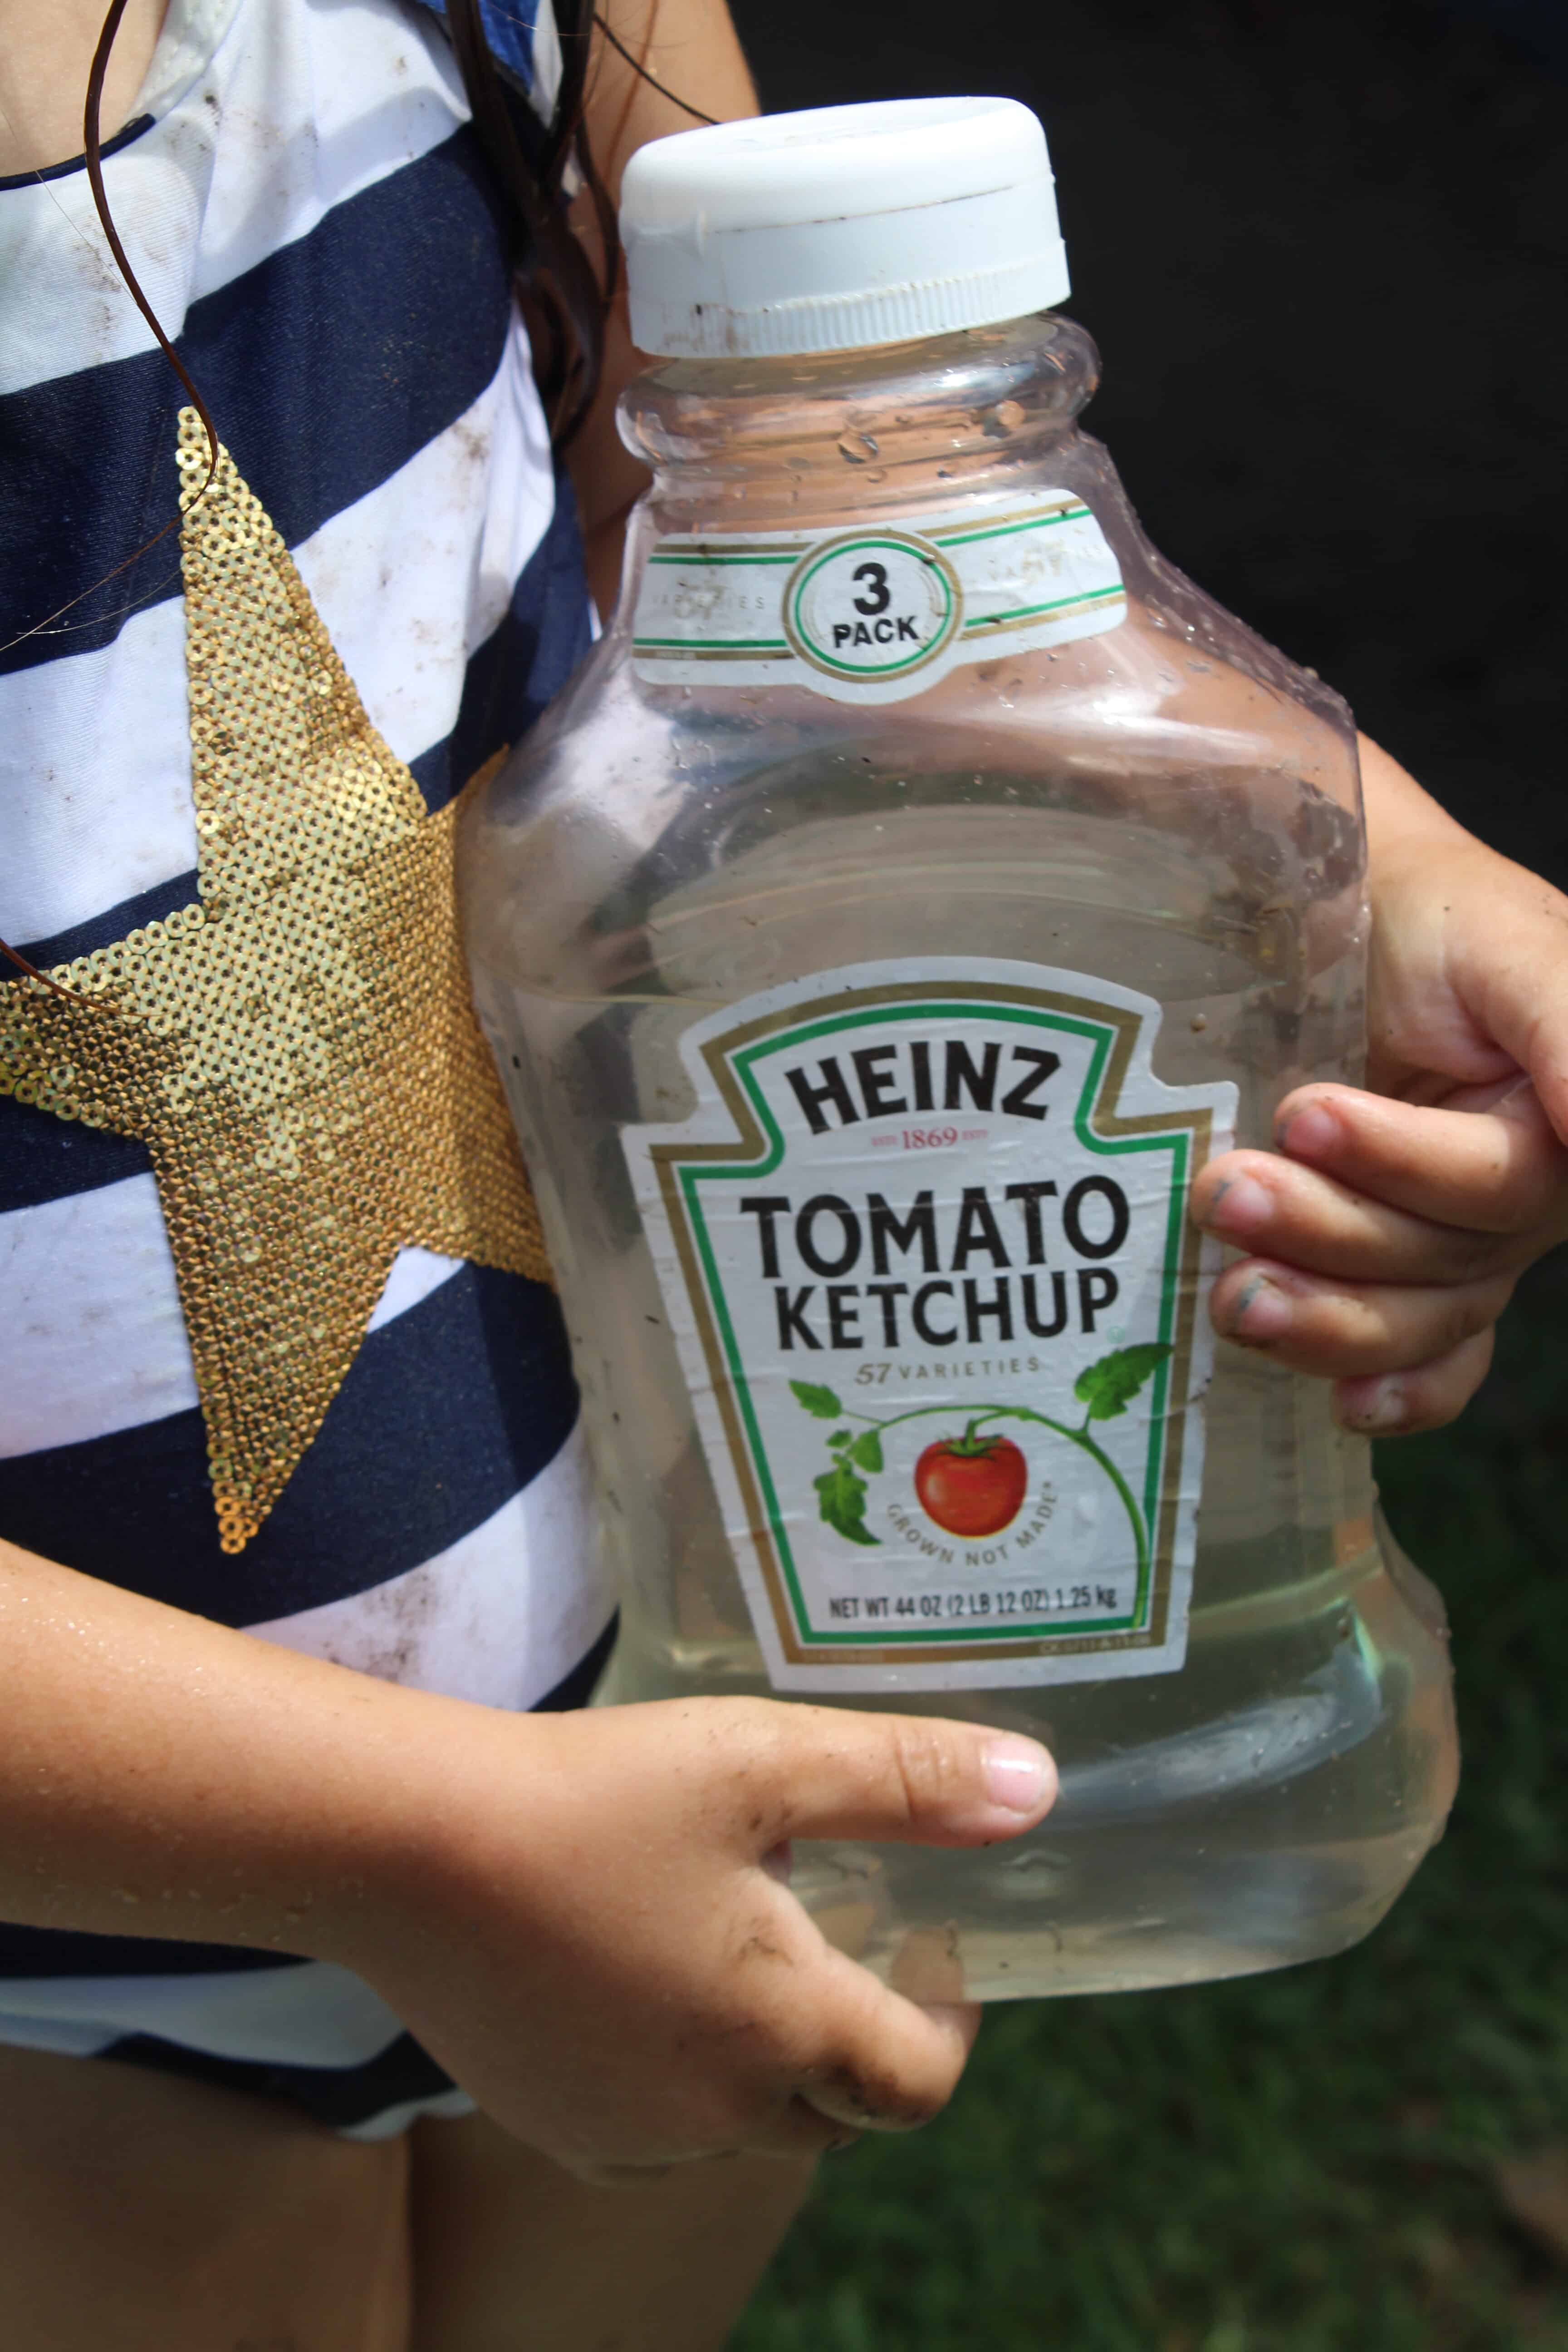 Little girl holding a recycled ketchup bottle